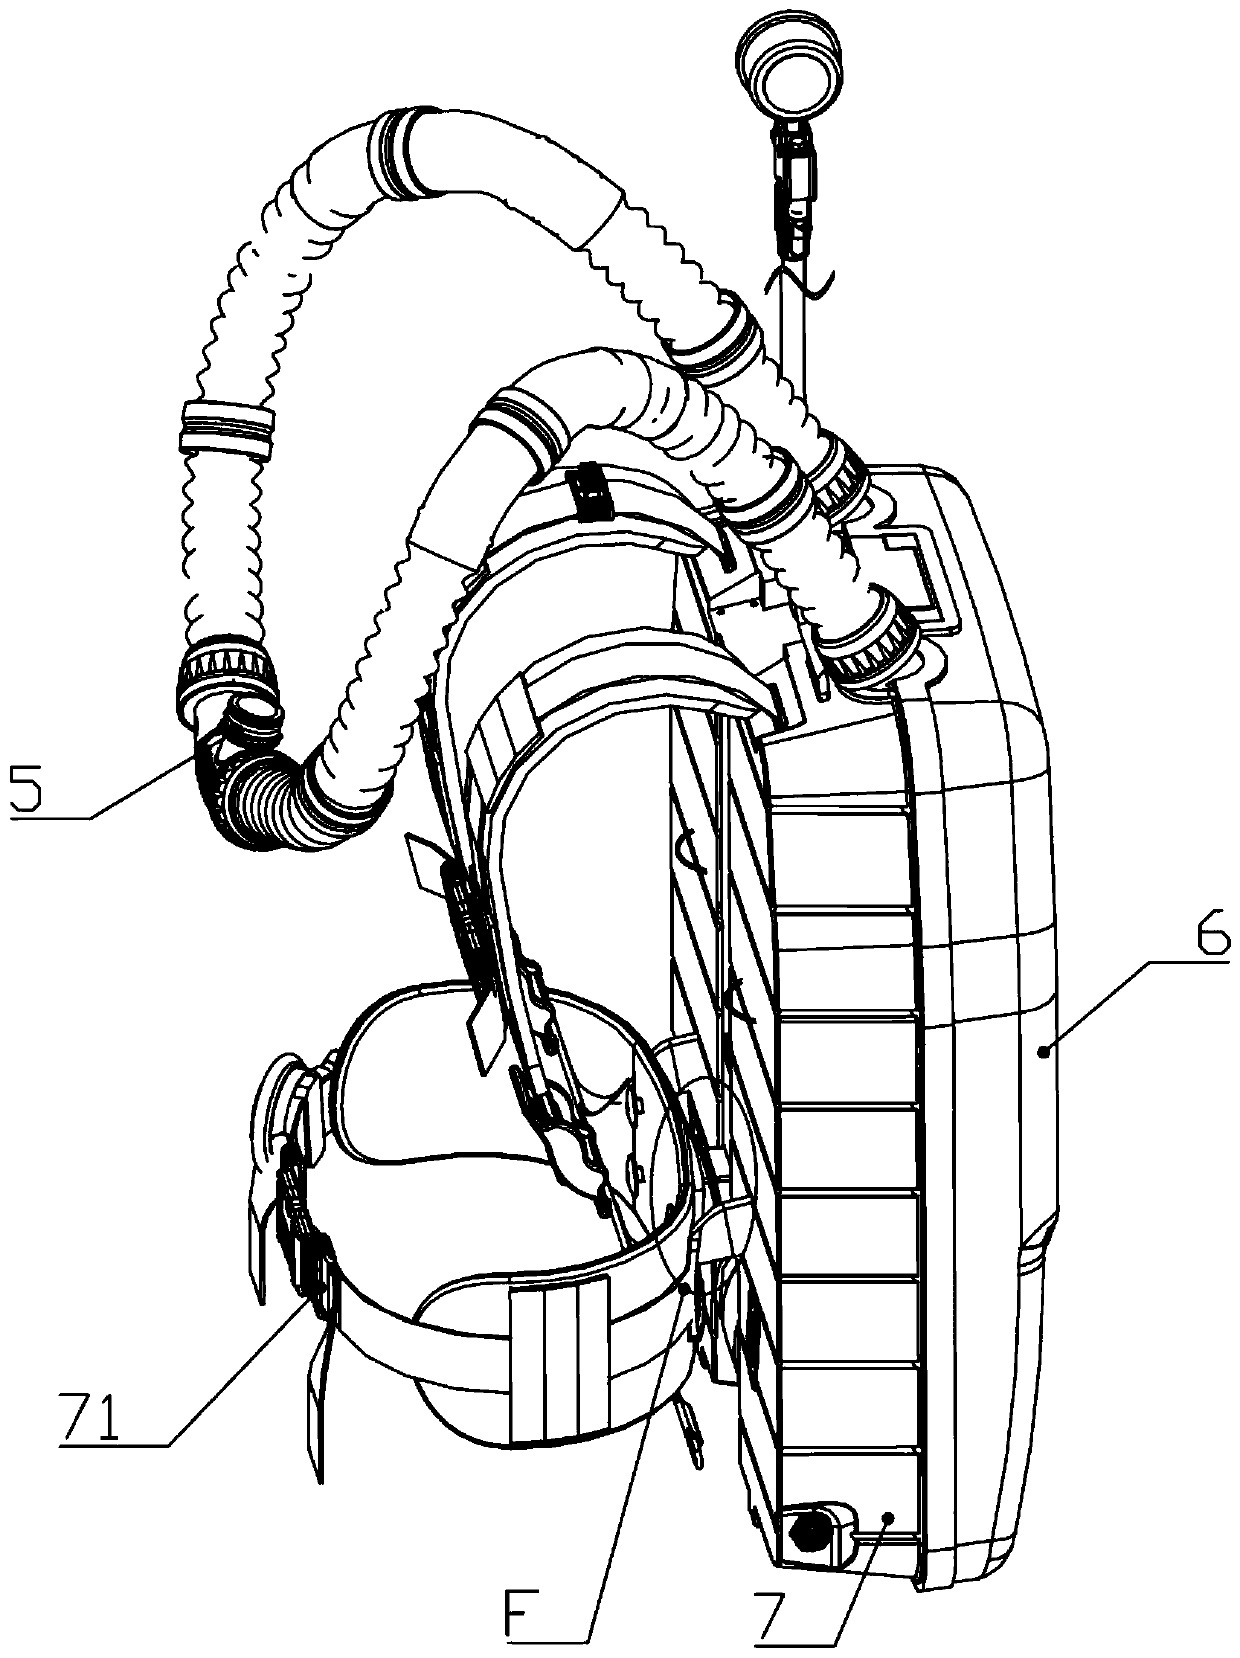 Oxygen respirator with novel ventilation structure